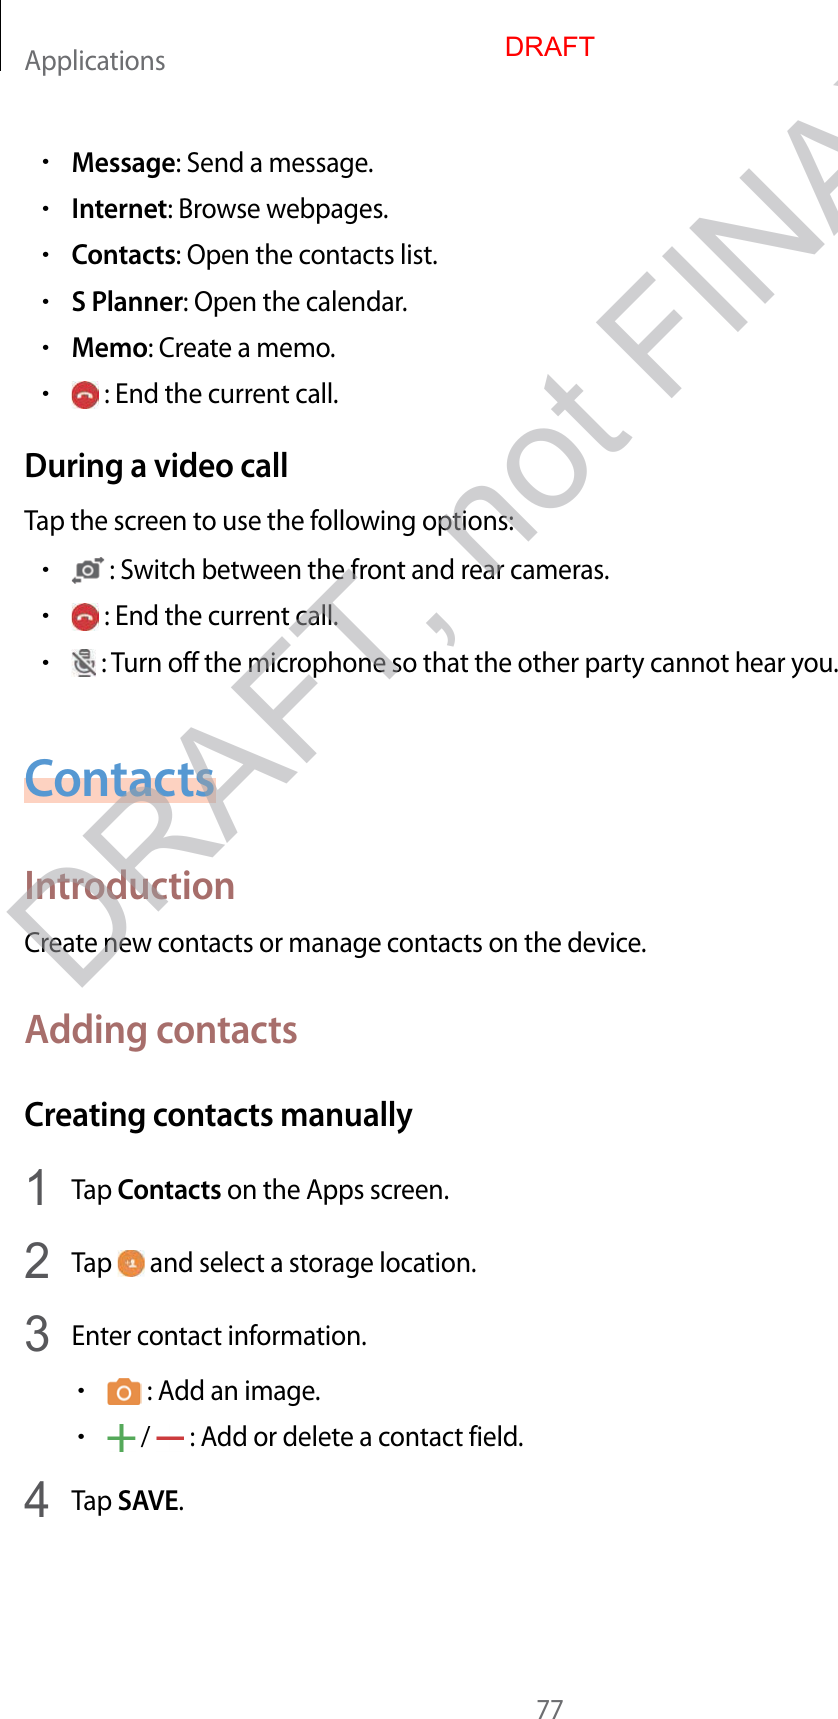 Applications77•Message: Send a message.•Internet: Browse webpages.•Contacts: Open the contacts list.•S Planner: Open the calendar.•Memo: Create a memo.• : End the current call.During a video callTap the screen to use the following options:• : Switch between the front and rear cameras.• : End the current call.• : Turn off the microphone so that the other party cannot hear you.ContactsIntroductionCreate new contacts or manage contacts on the device.Adding contactsCreating contacts manually1  Tap Contacts on the Apps screen.2  Tap   and select a storage location.3  Enter contact information.• : Add an image.• /   : Add or delete a contact field.4  Tap SAVE.DRAFTDRAFT, not FINAX